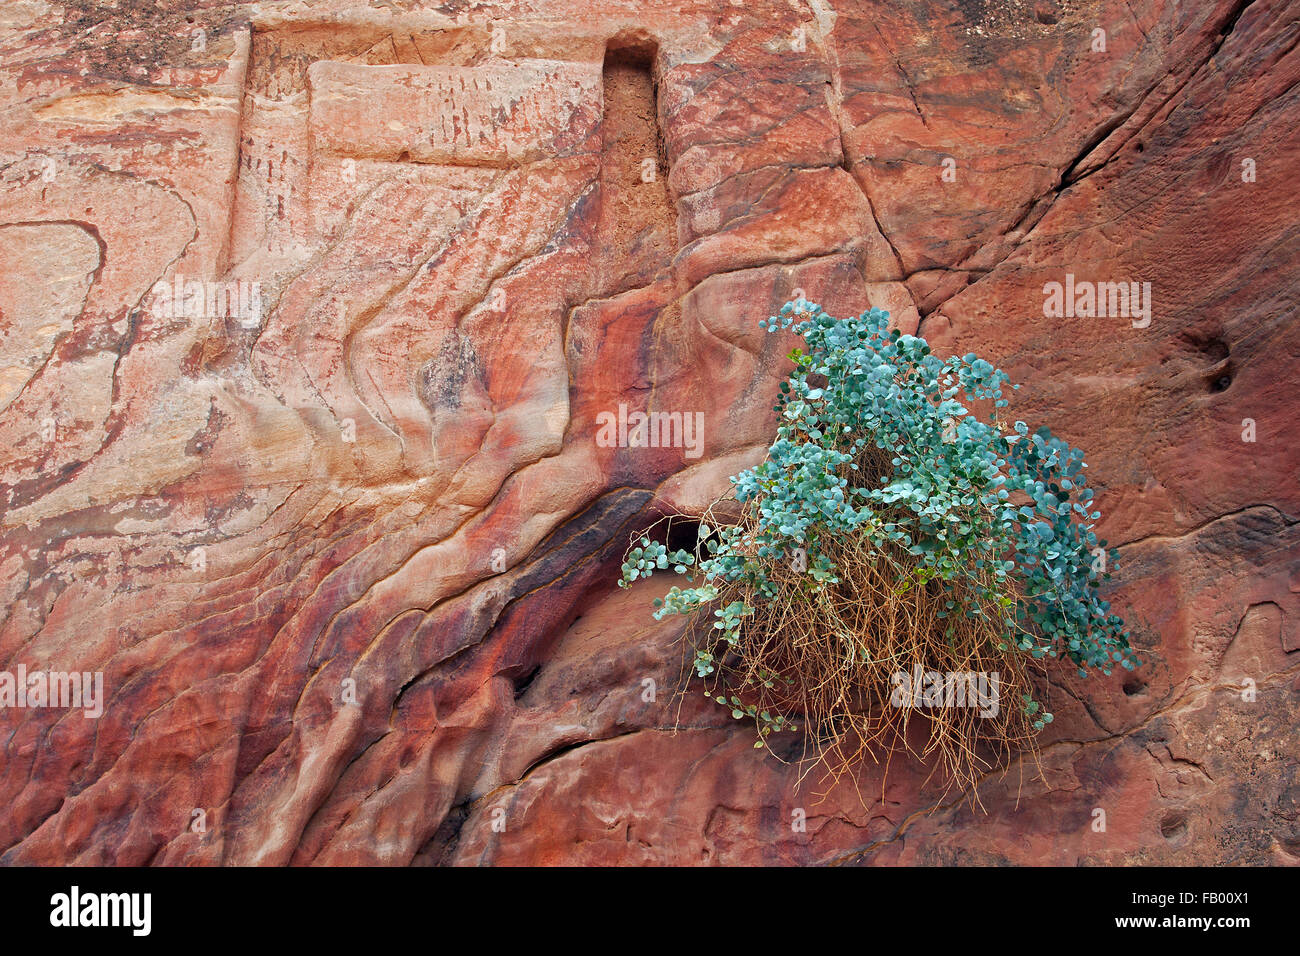 Silver-blue caper bush (Capparis cartilaginea) and carvings in sandstone rock face in the ancient city of Petra, southern Jordan Stock Photo